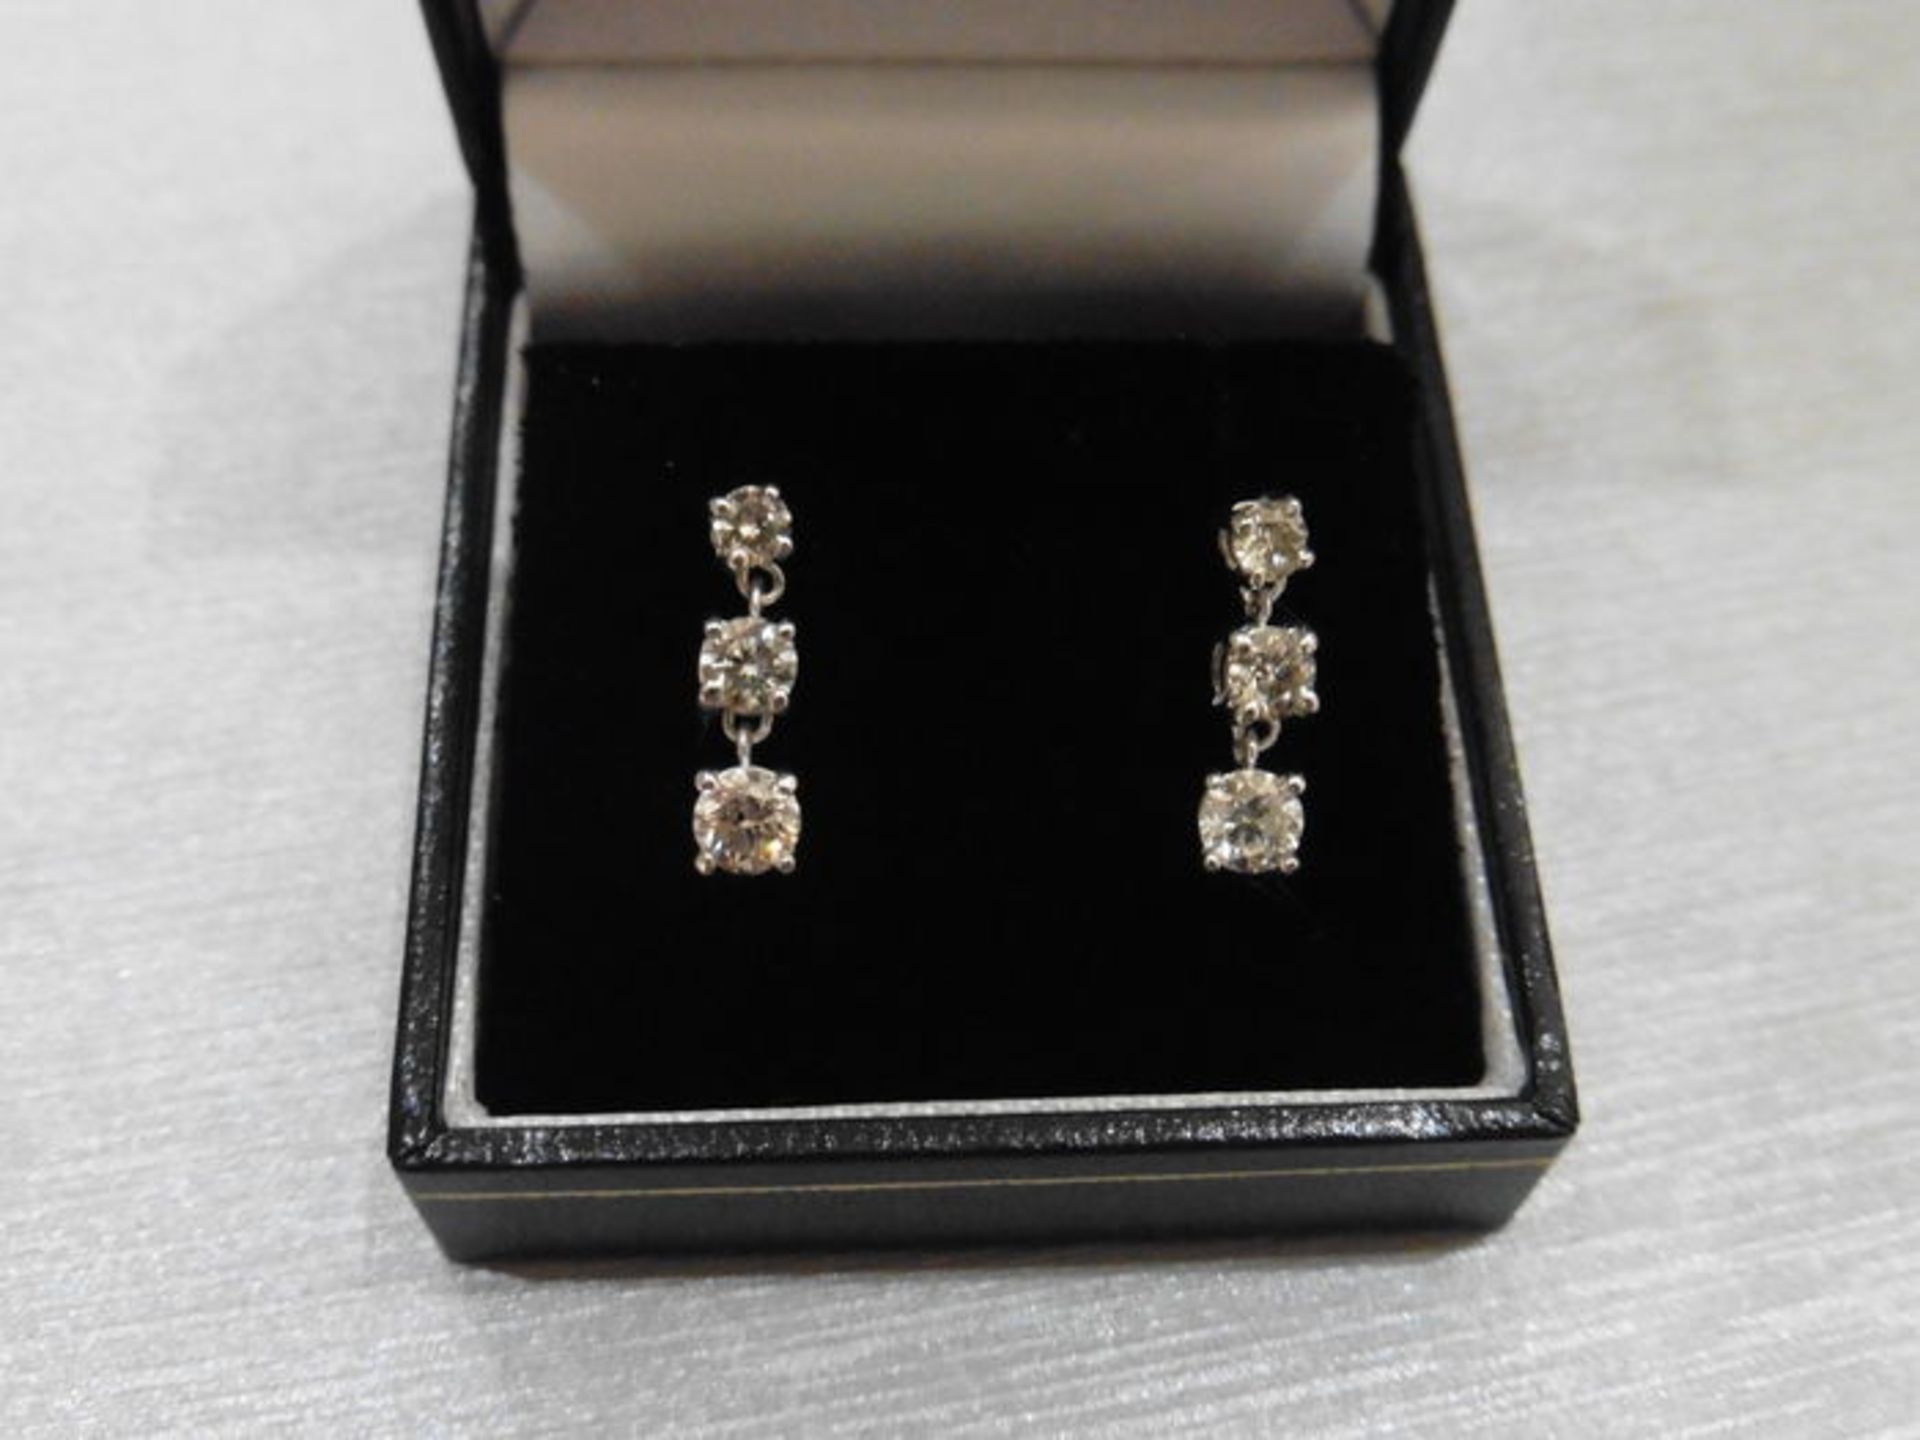 1.20ct diamond trilogy drop earrings. I-J colour, si2 clarity weighing 1.20ct total. Claw setting in - Bild 3 aus 3